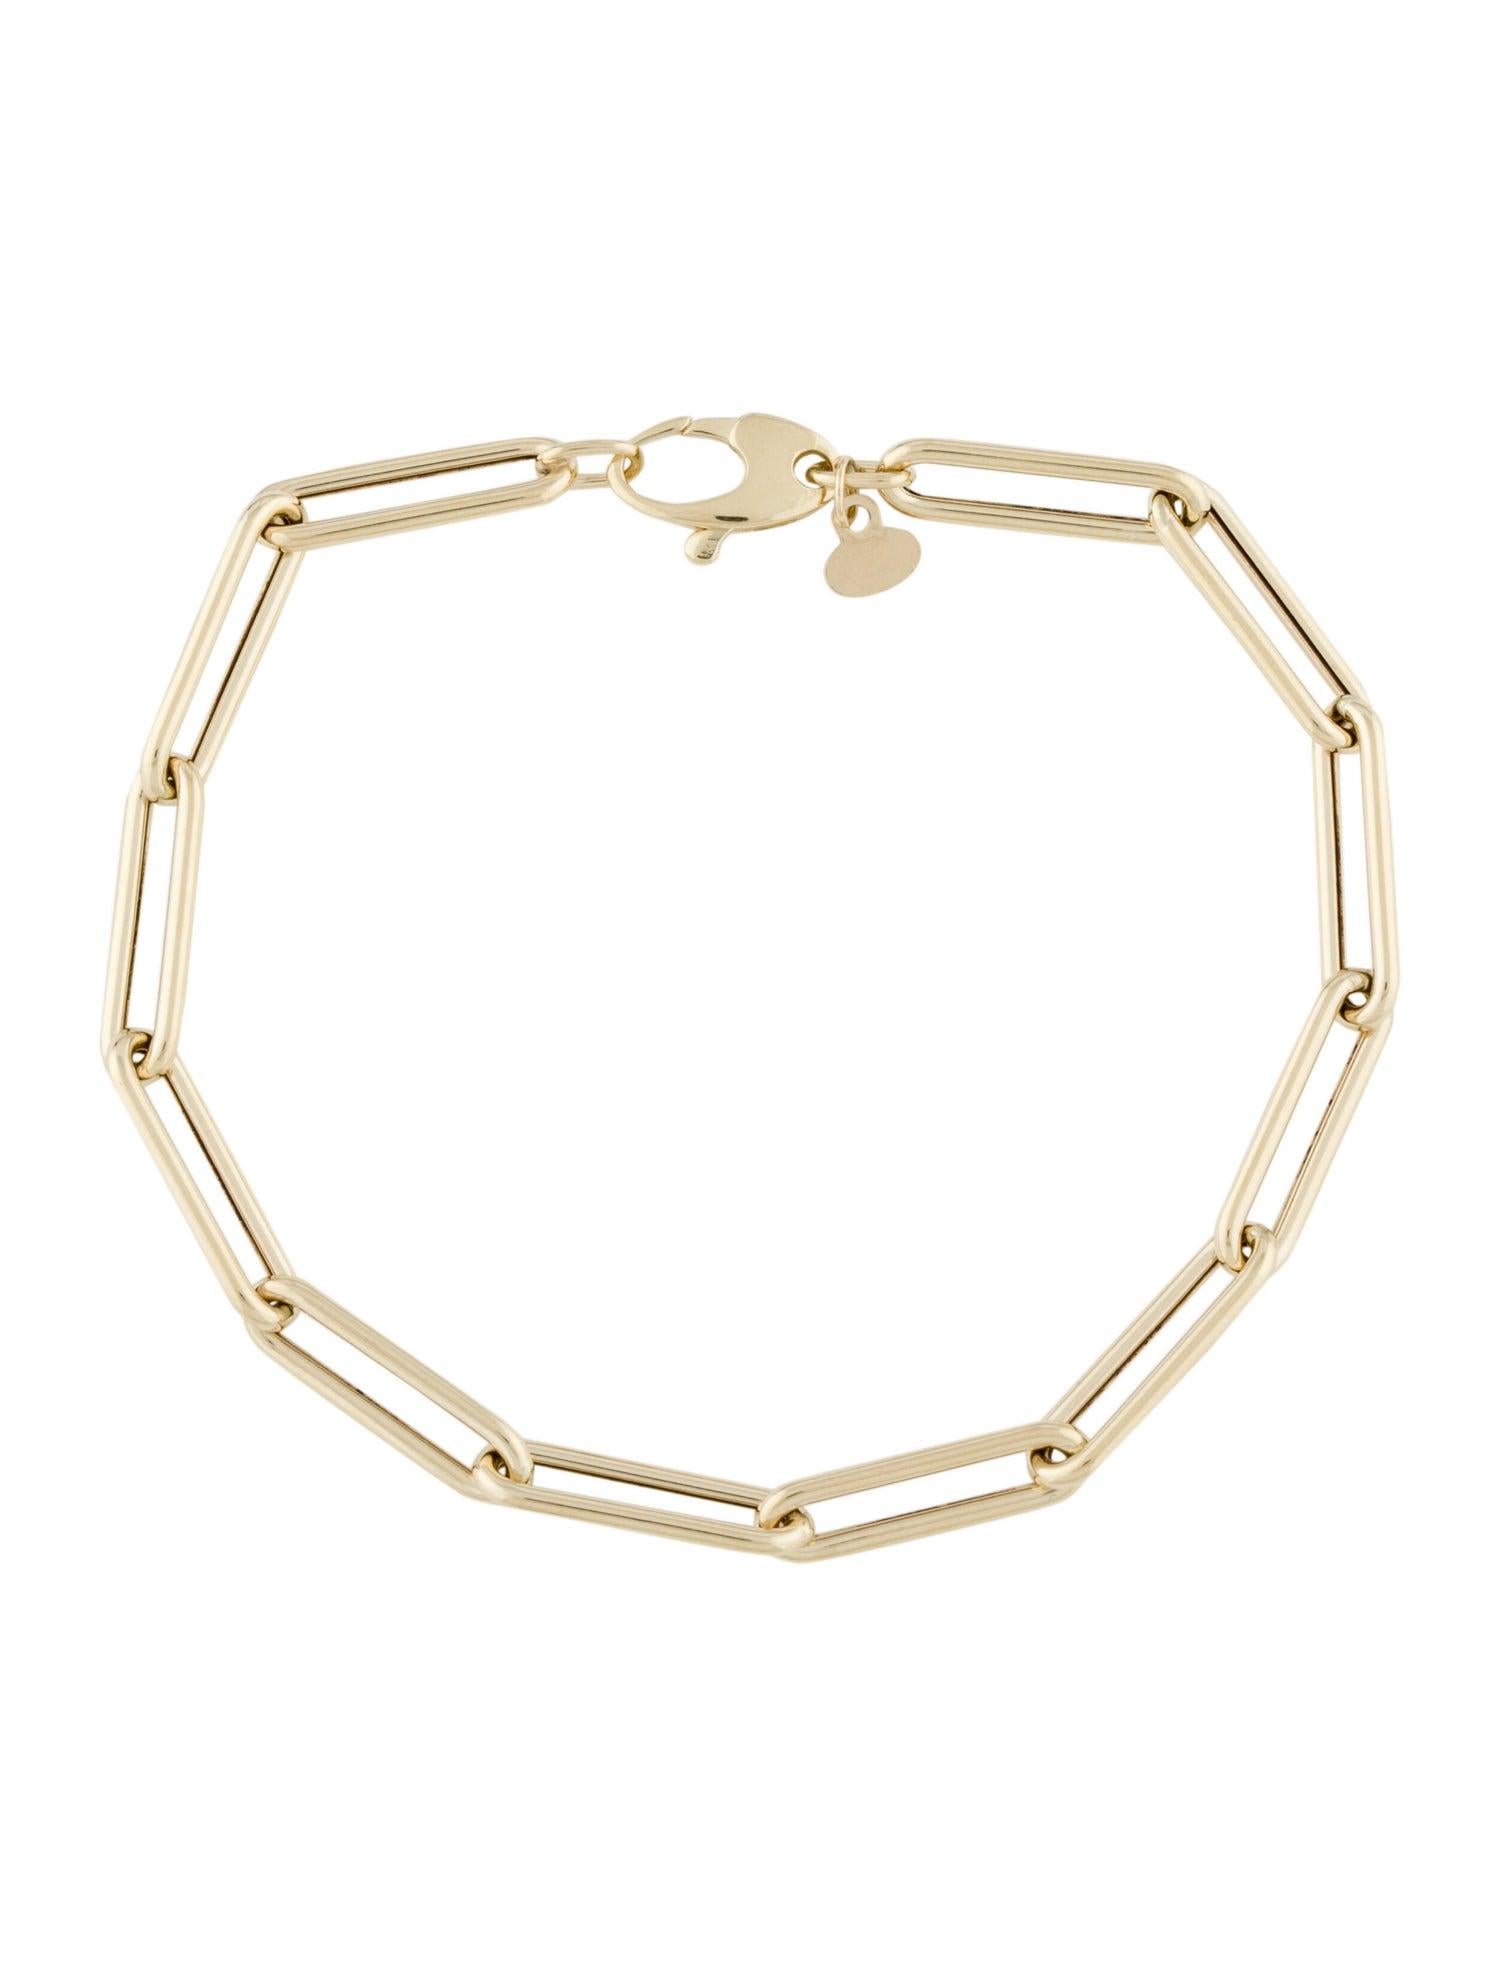 This Classic yet Trendy Paperclip Gold bracelet is a classic staple in any person's jewelry box! This 14K Yellow Gold paper-clip large link chain measuring 7